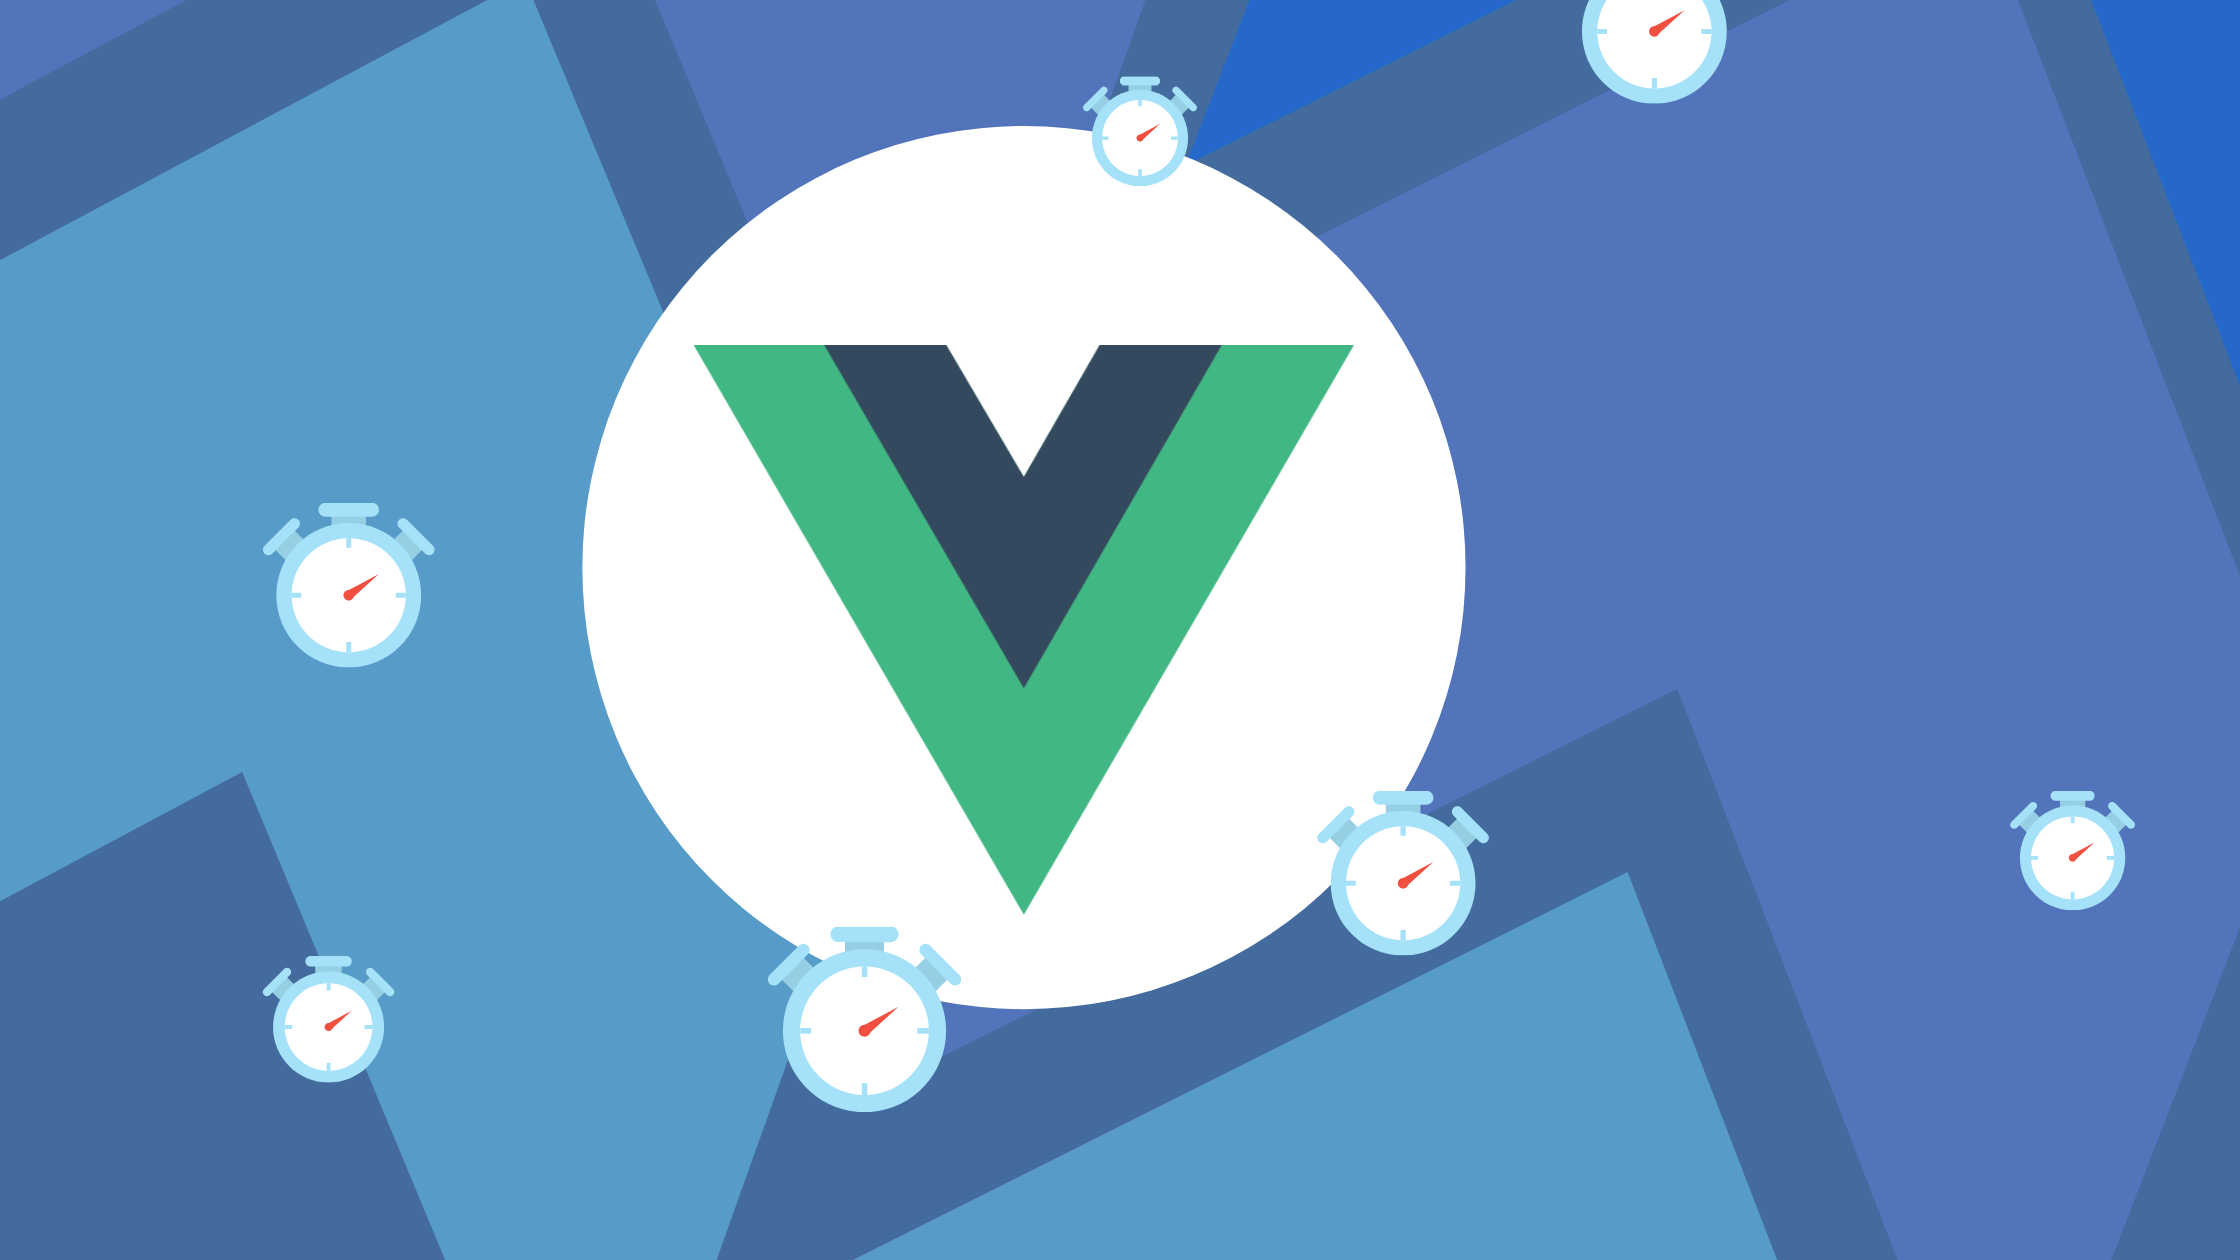 Optimizing the Performance of Your Vue Apps Using Web Workers